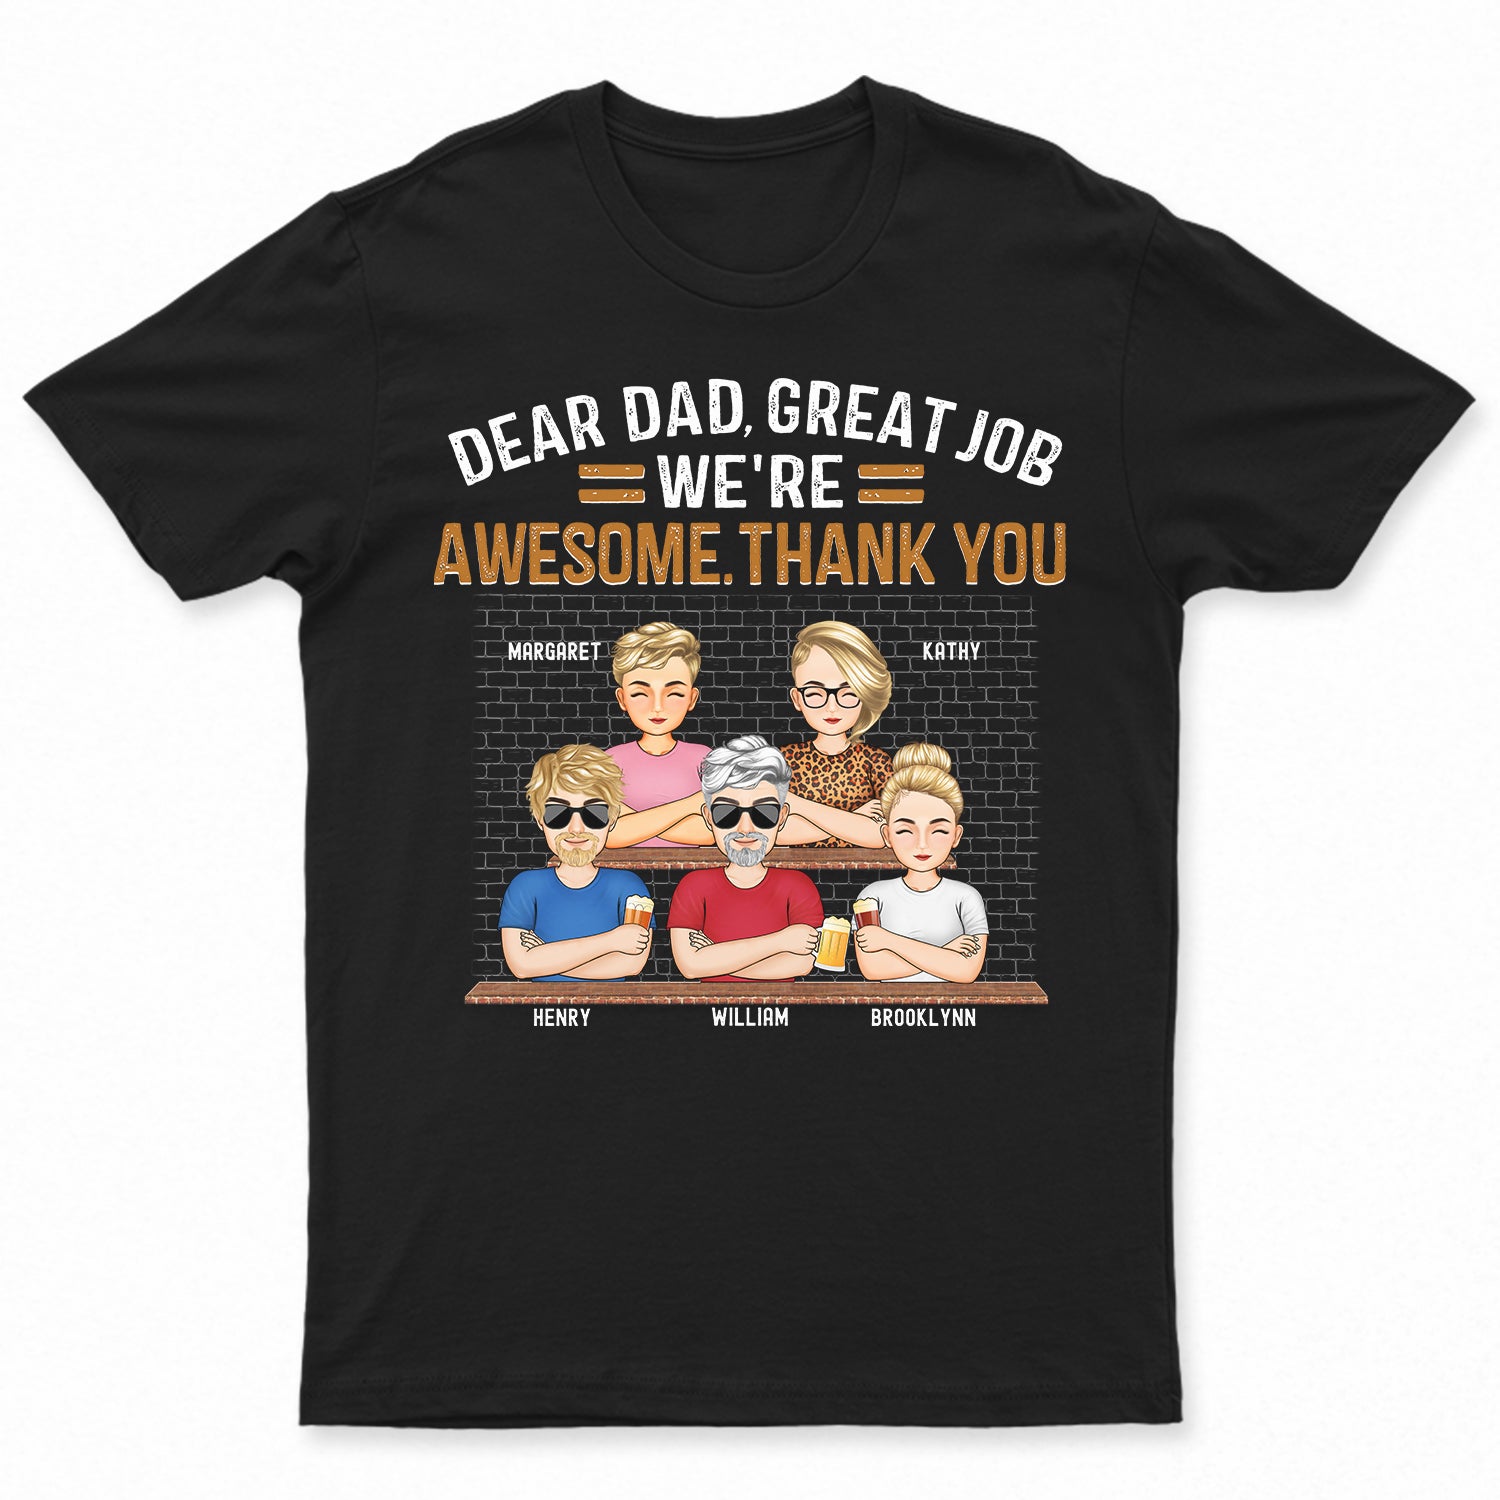 Dear Dad Great Job We're Awesome Thank You - Birthday, Loving Gift For Daddy, Father, Grandpa, Grandfather - Personalized Custom T Shirt